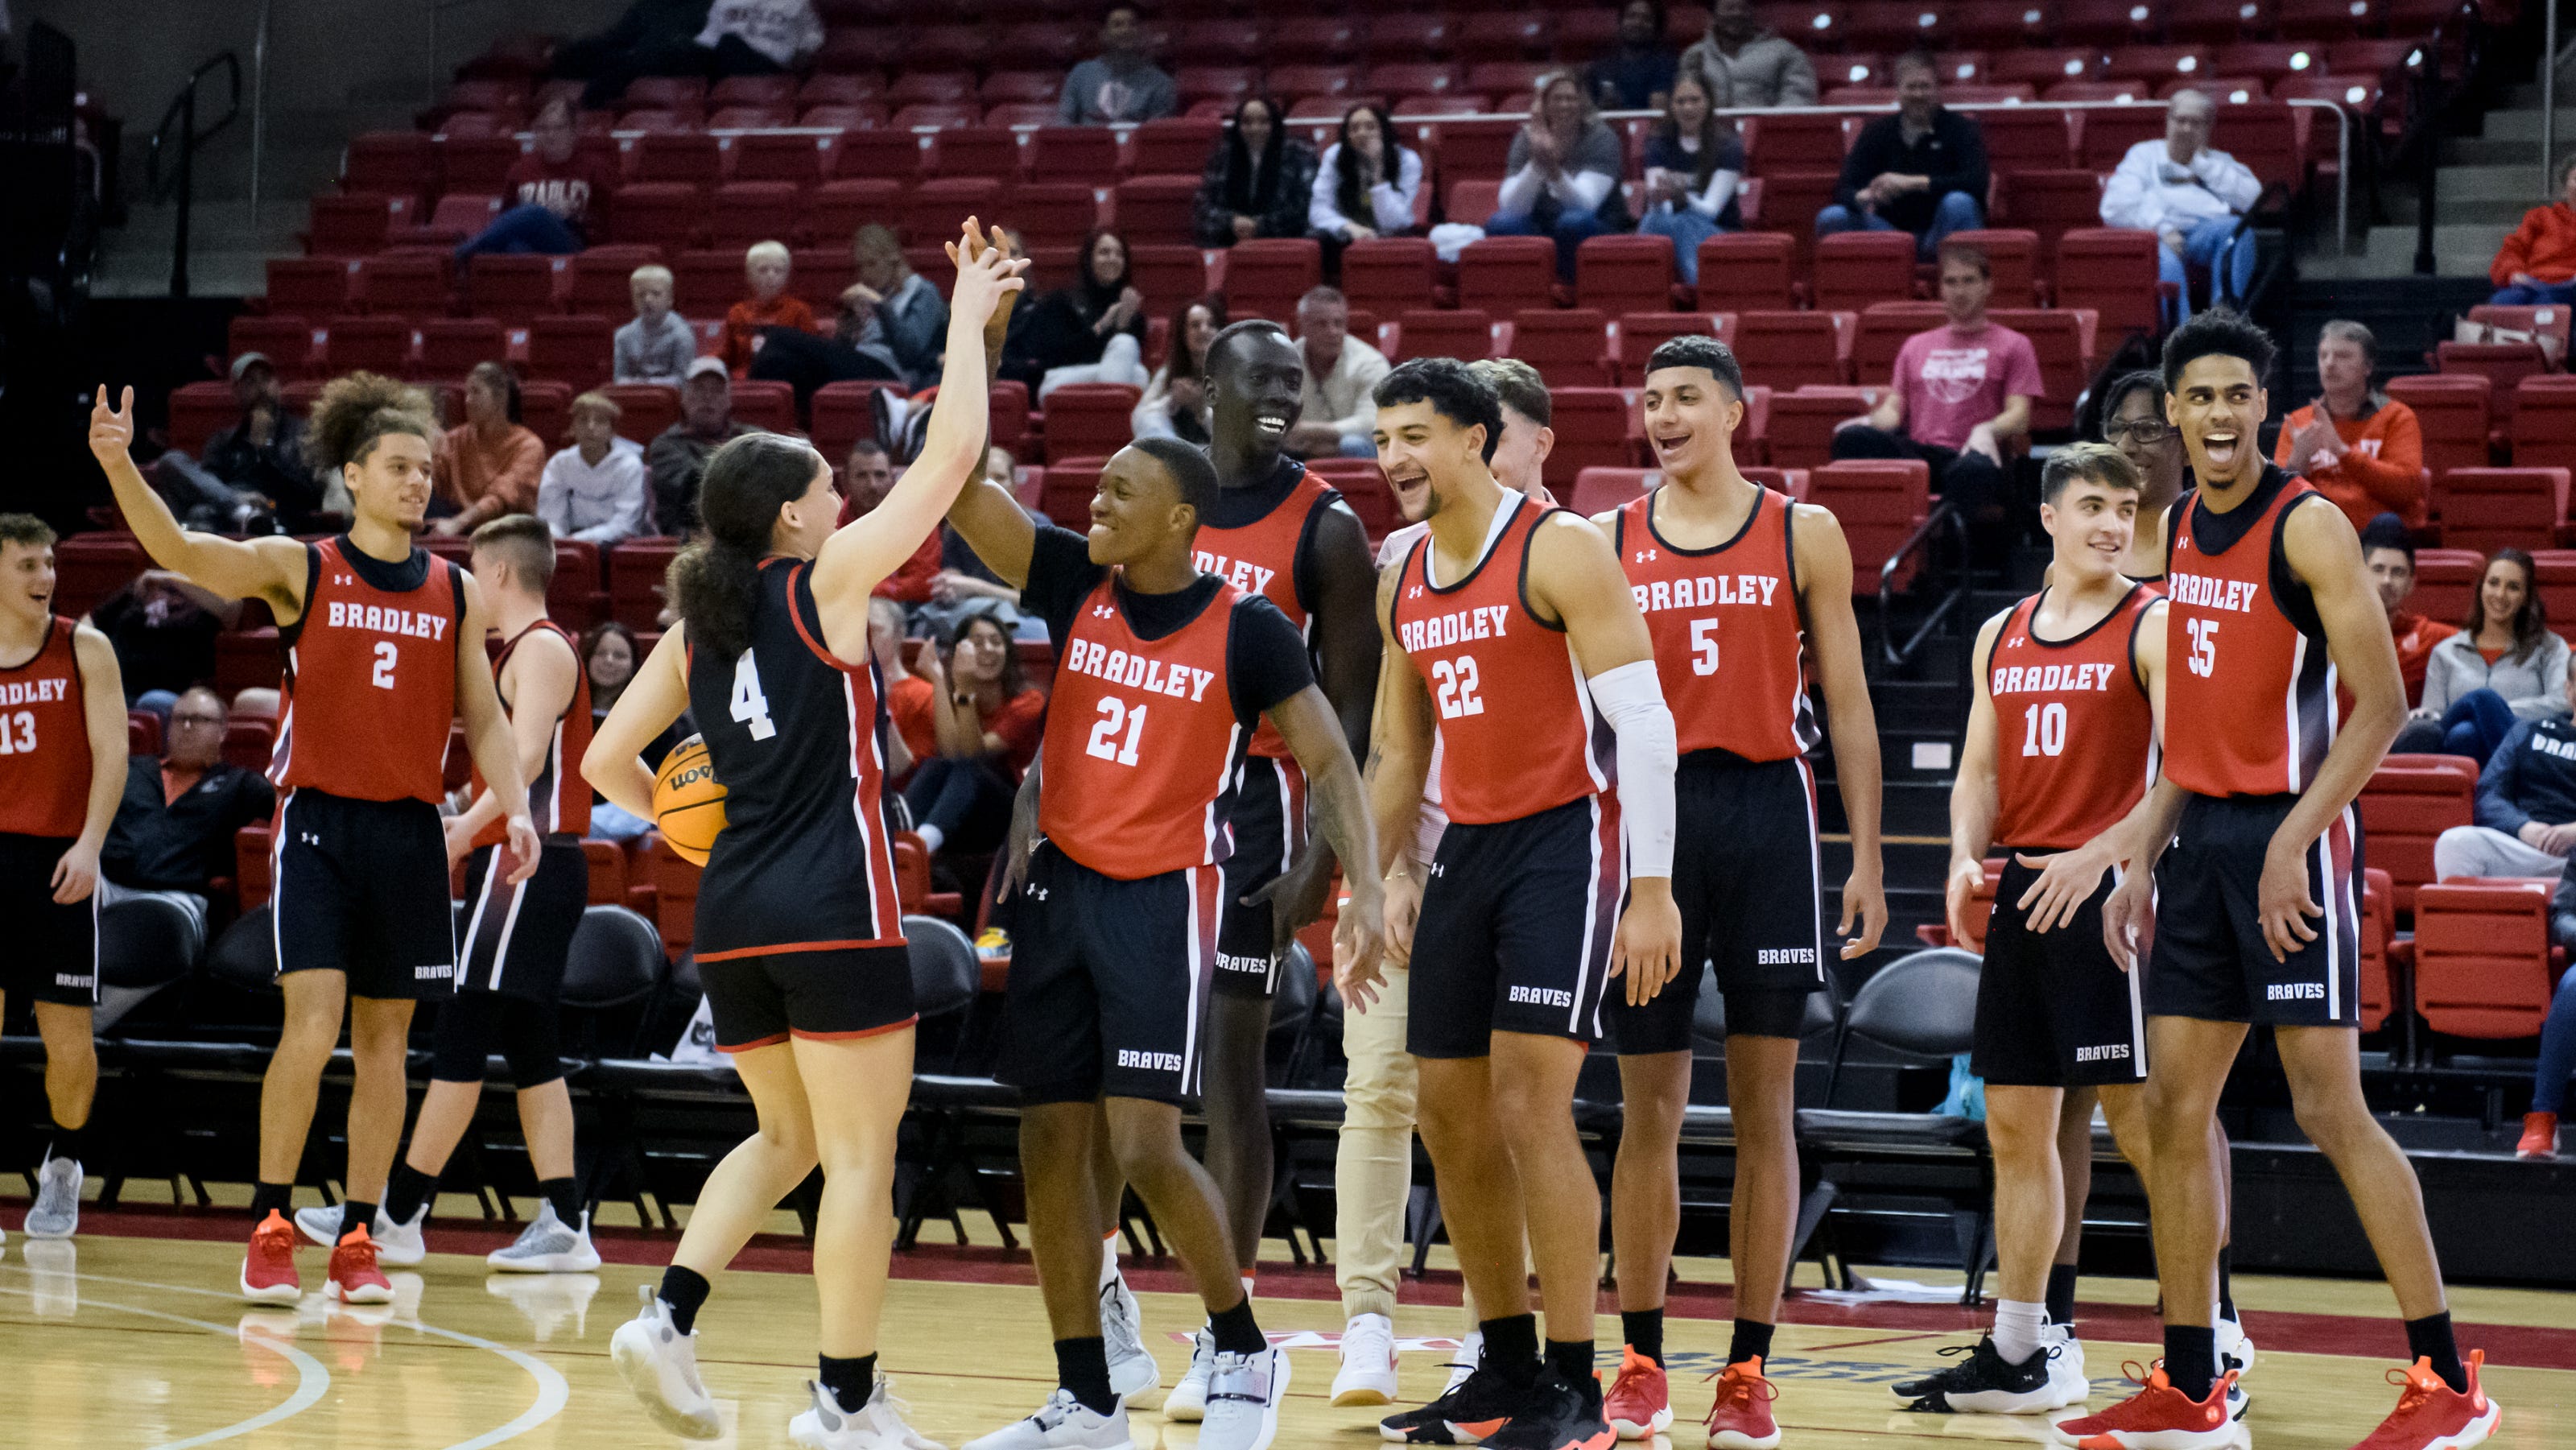 College basketball: Bradley has fun at annual red-white scrimmage